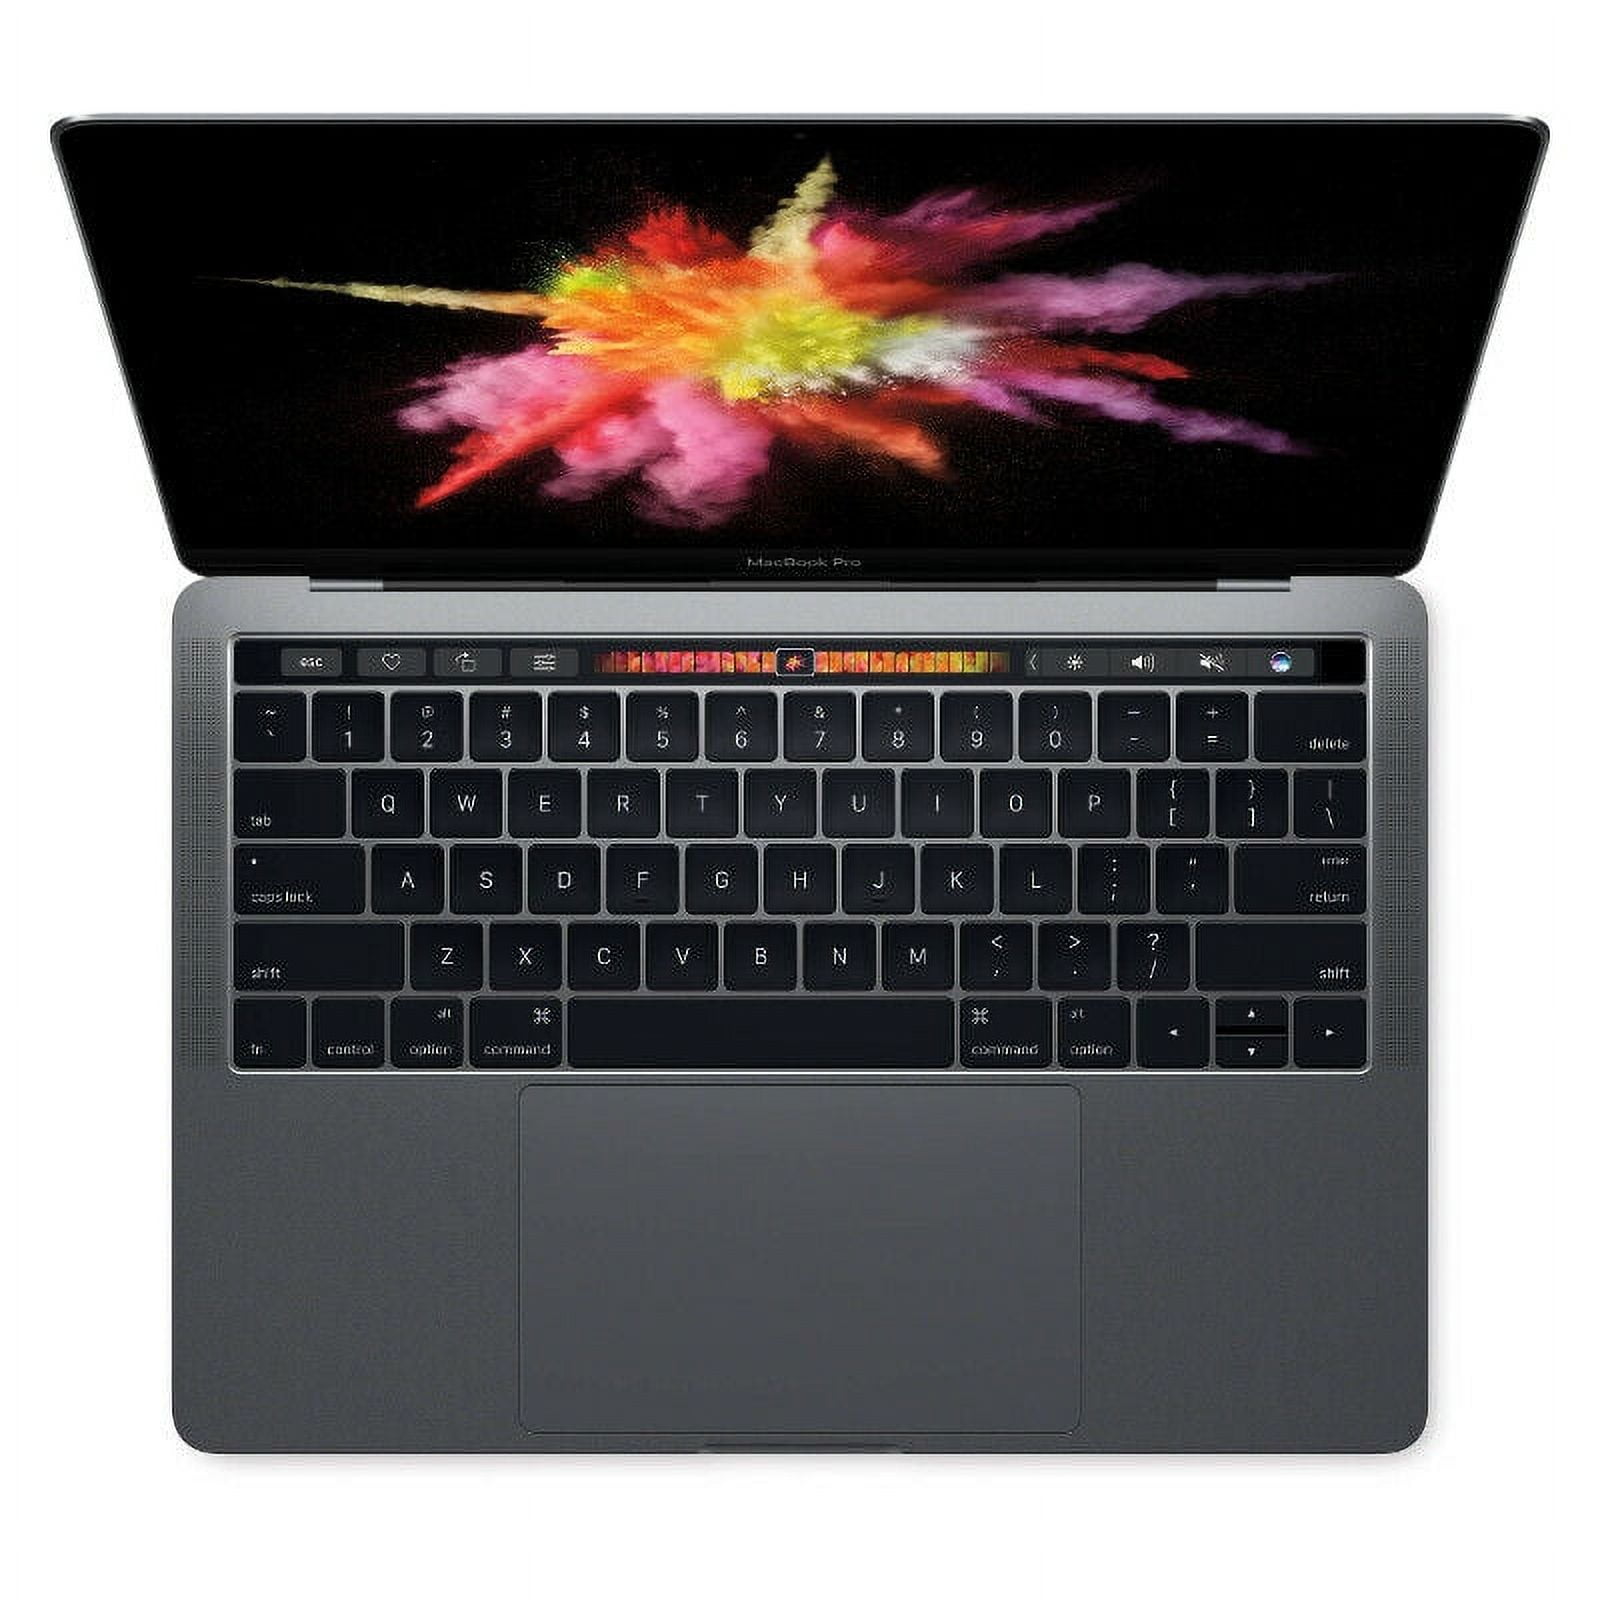 Apple MacBook Pro 15.4-inch with Touch Bar 2017 MPTR2LL/A, 2.8 GHz